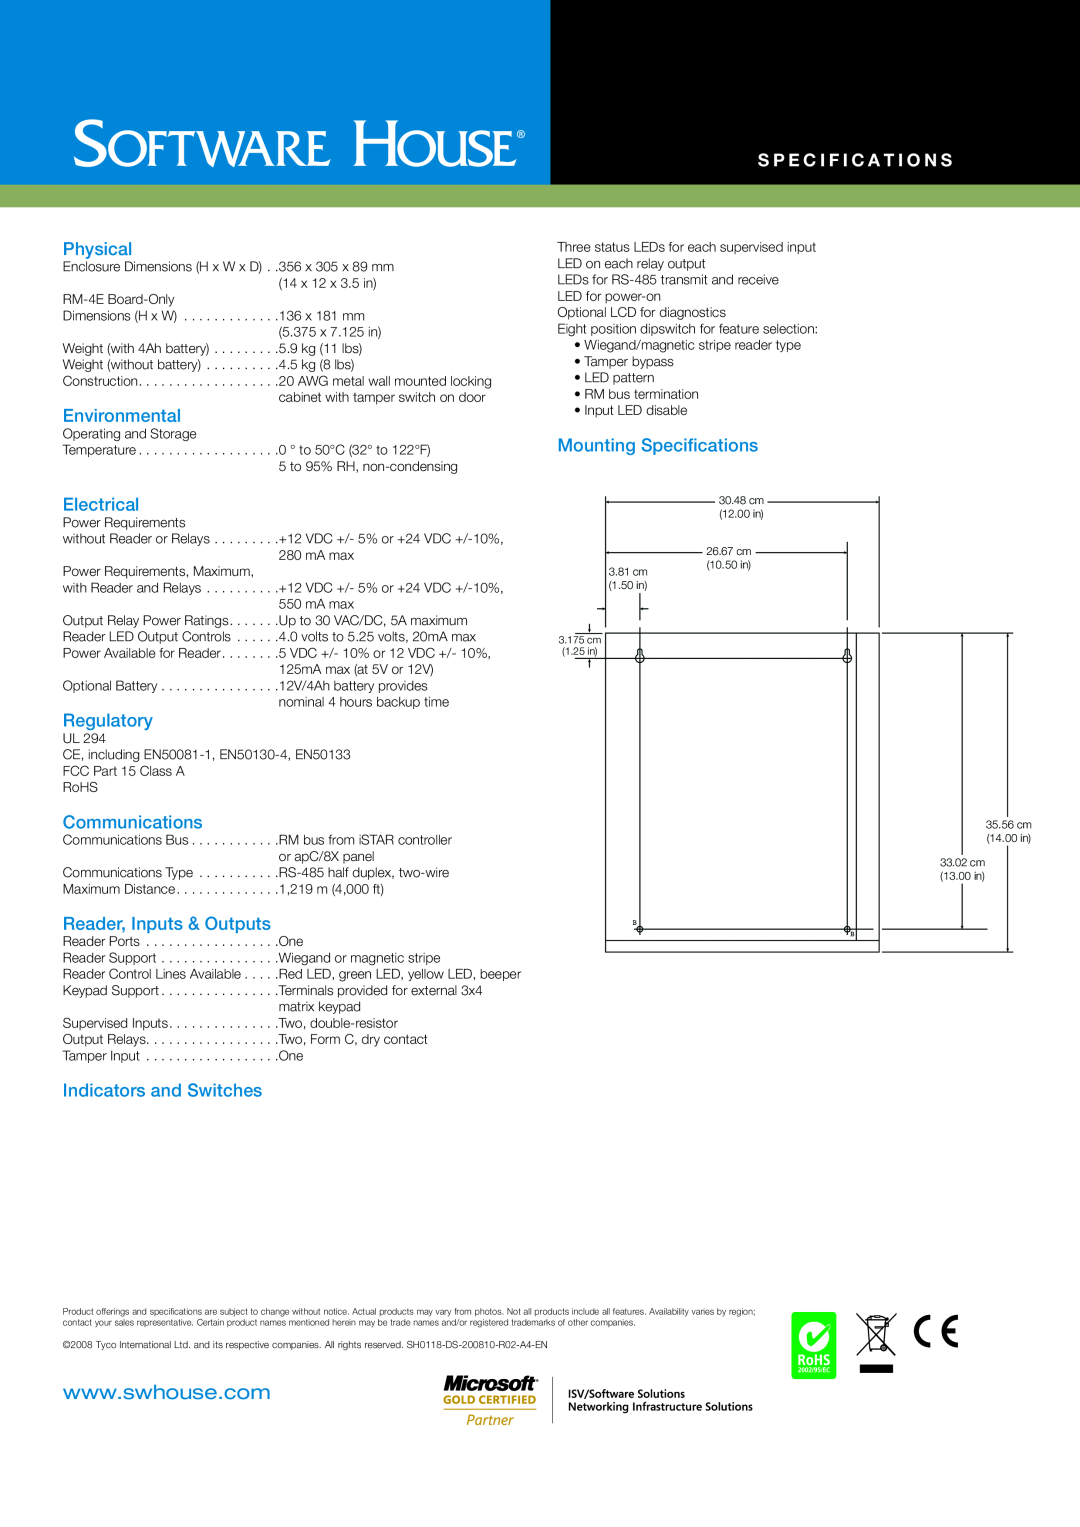 Tyco RM-DCM-2 manual s p e c i f i c a t i o n s, Physical, Environmental, Electrical, Mounting Specifications, Regulatory 